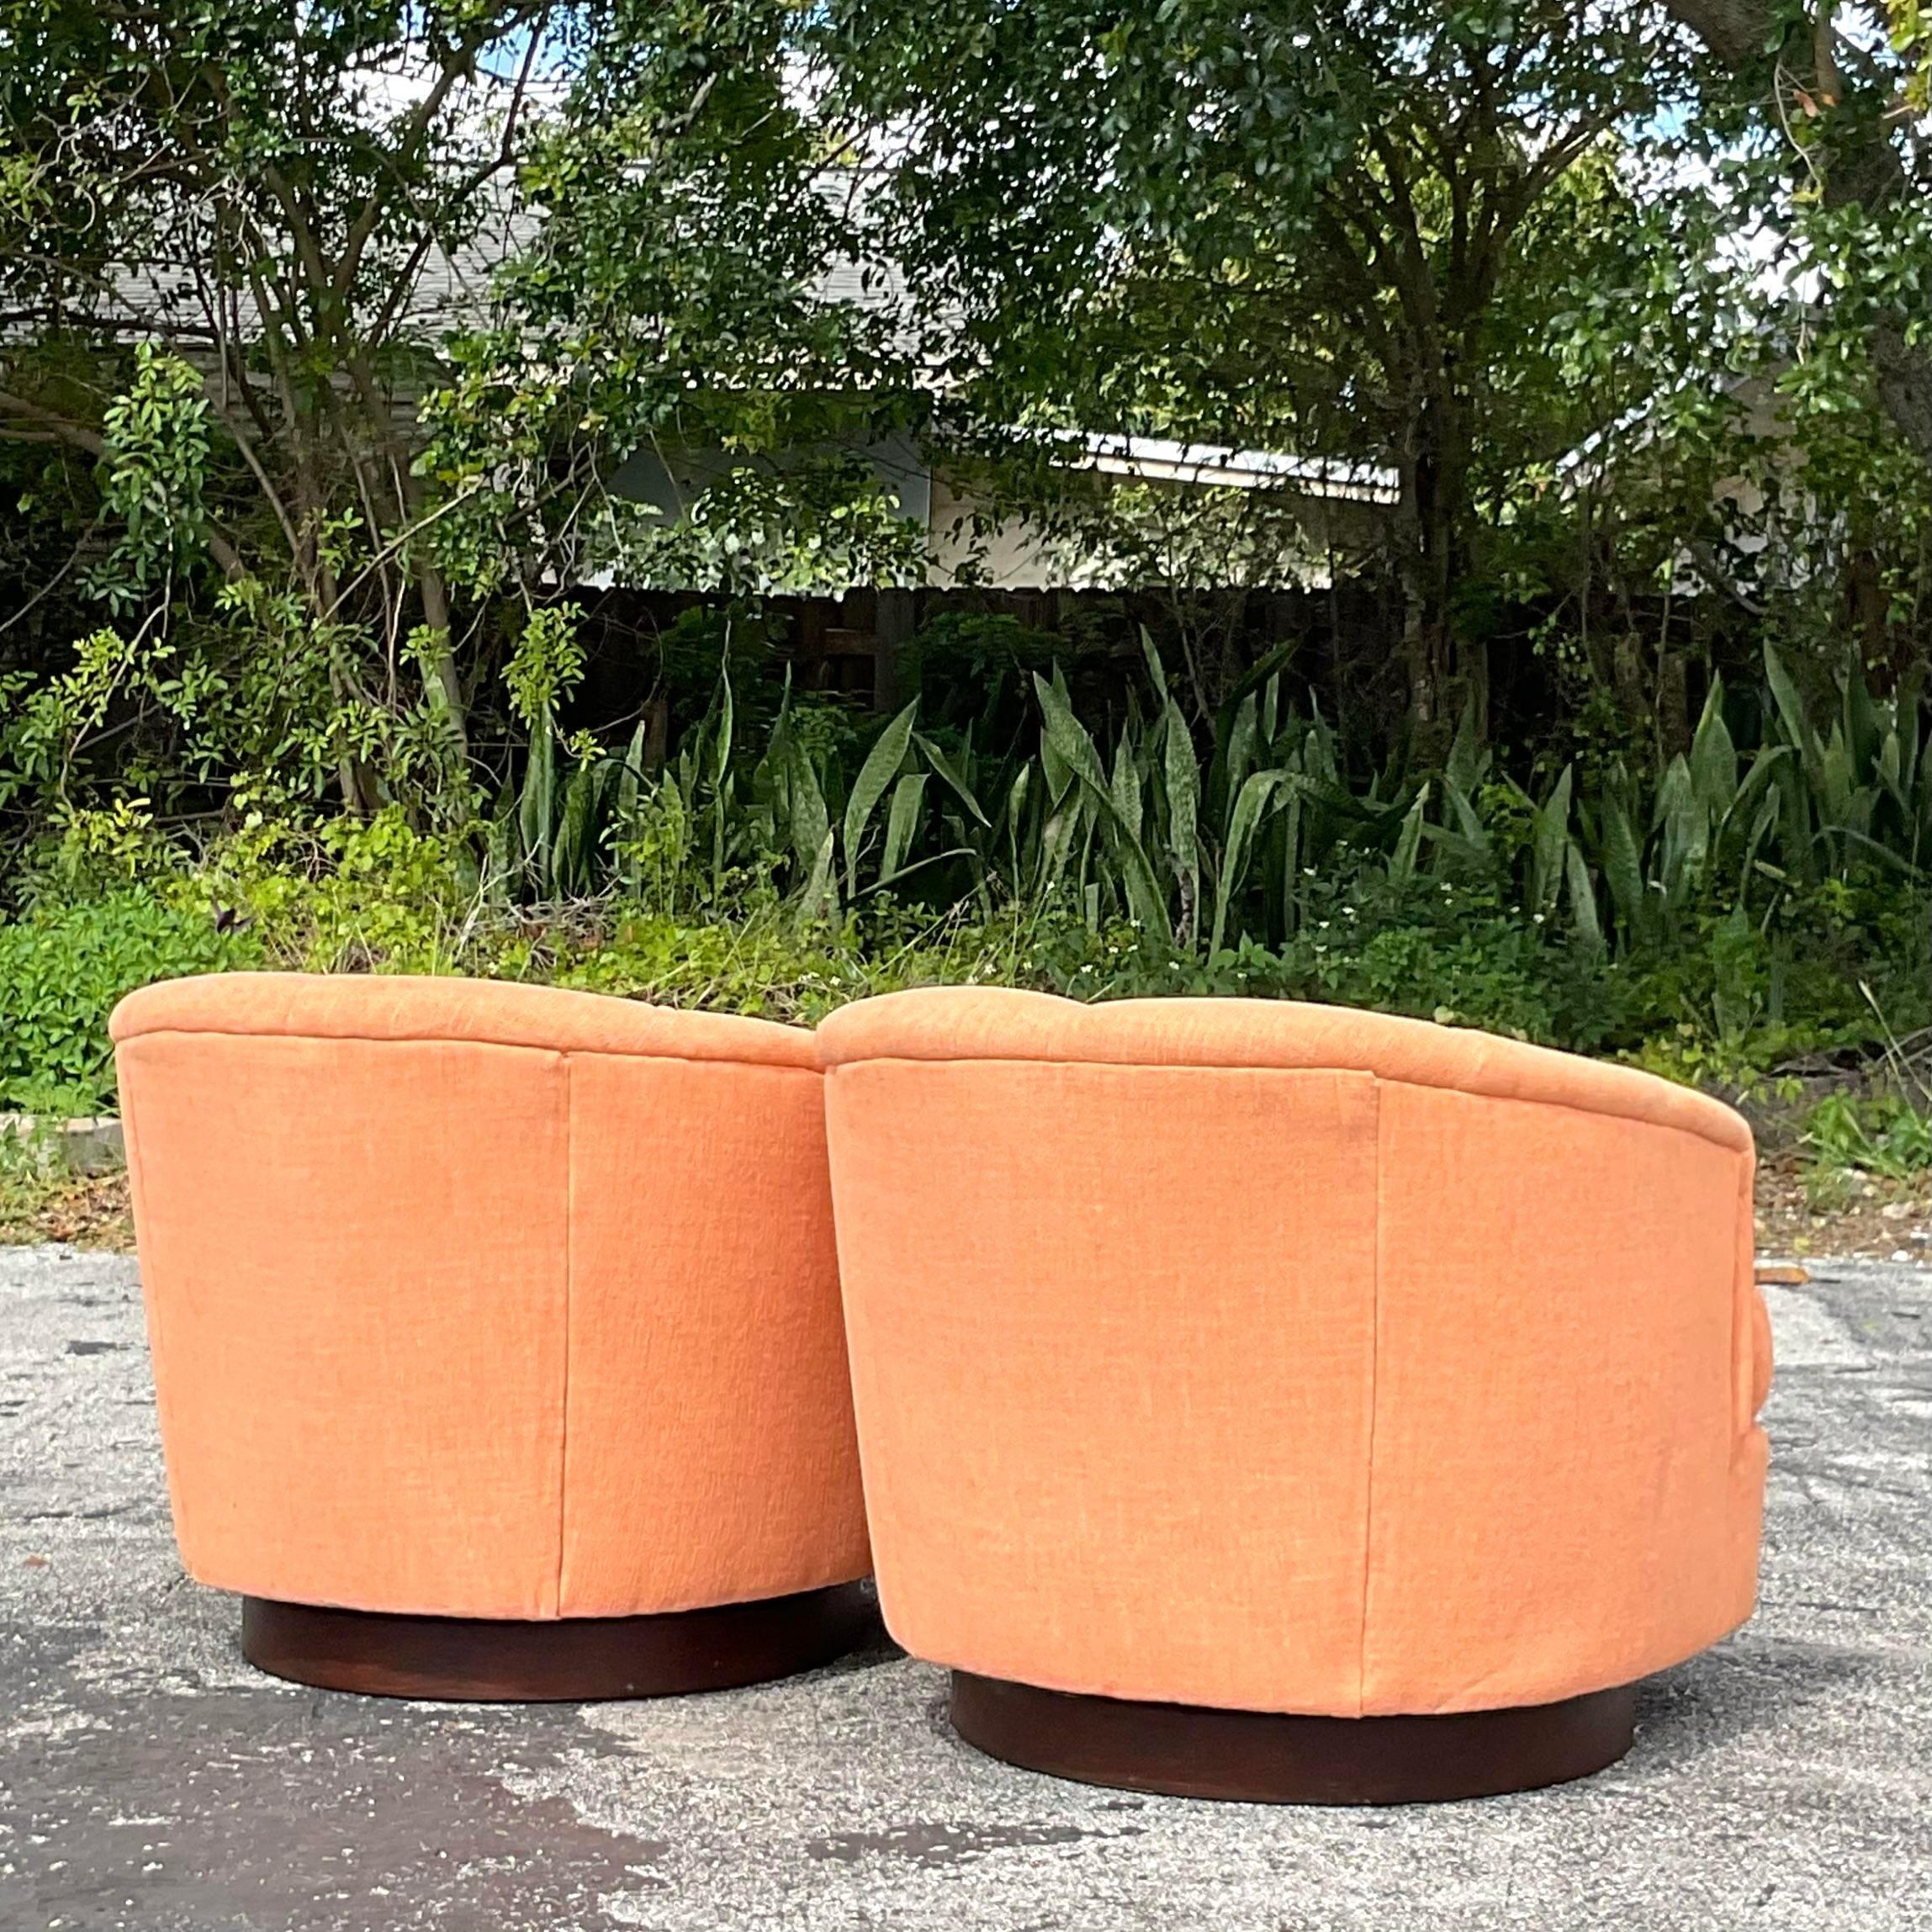 Iconic Boho Flair: Vintage Tufted Swivel Chairs Inspired by Milo Baughman - A Pair. Infuse your space with American ingenuity and bohemian charm, featuring timeless design and comfortable functionality for a statement seating arrangement 